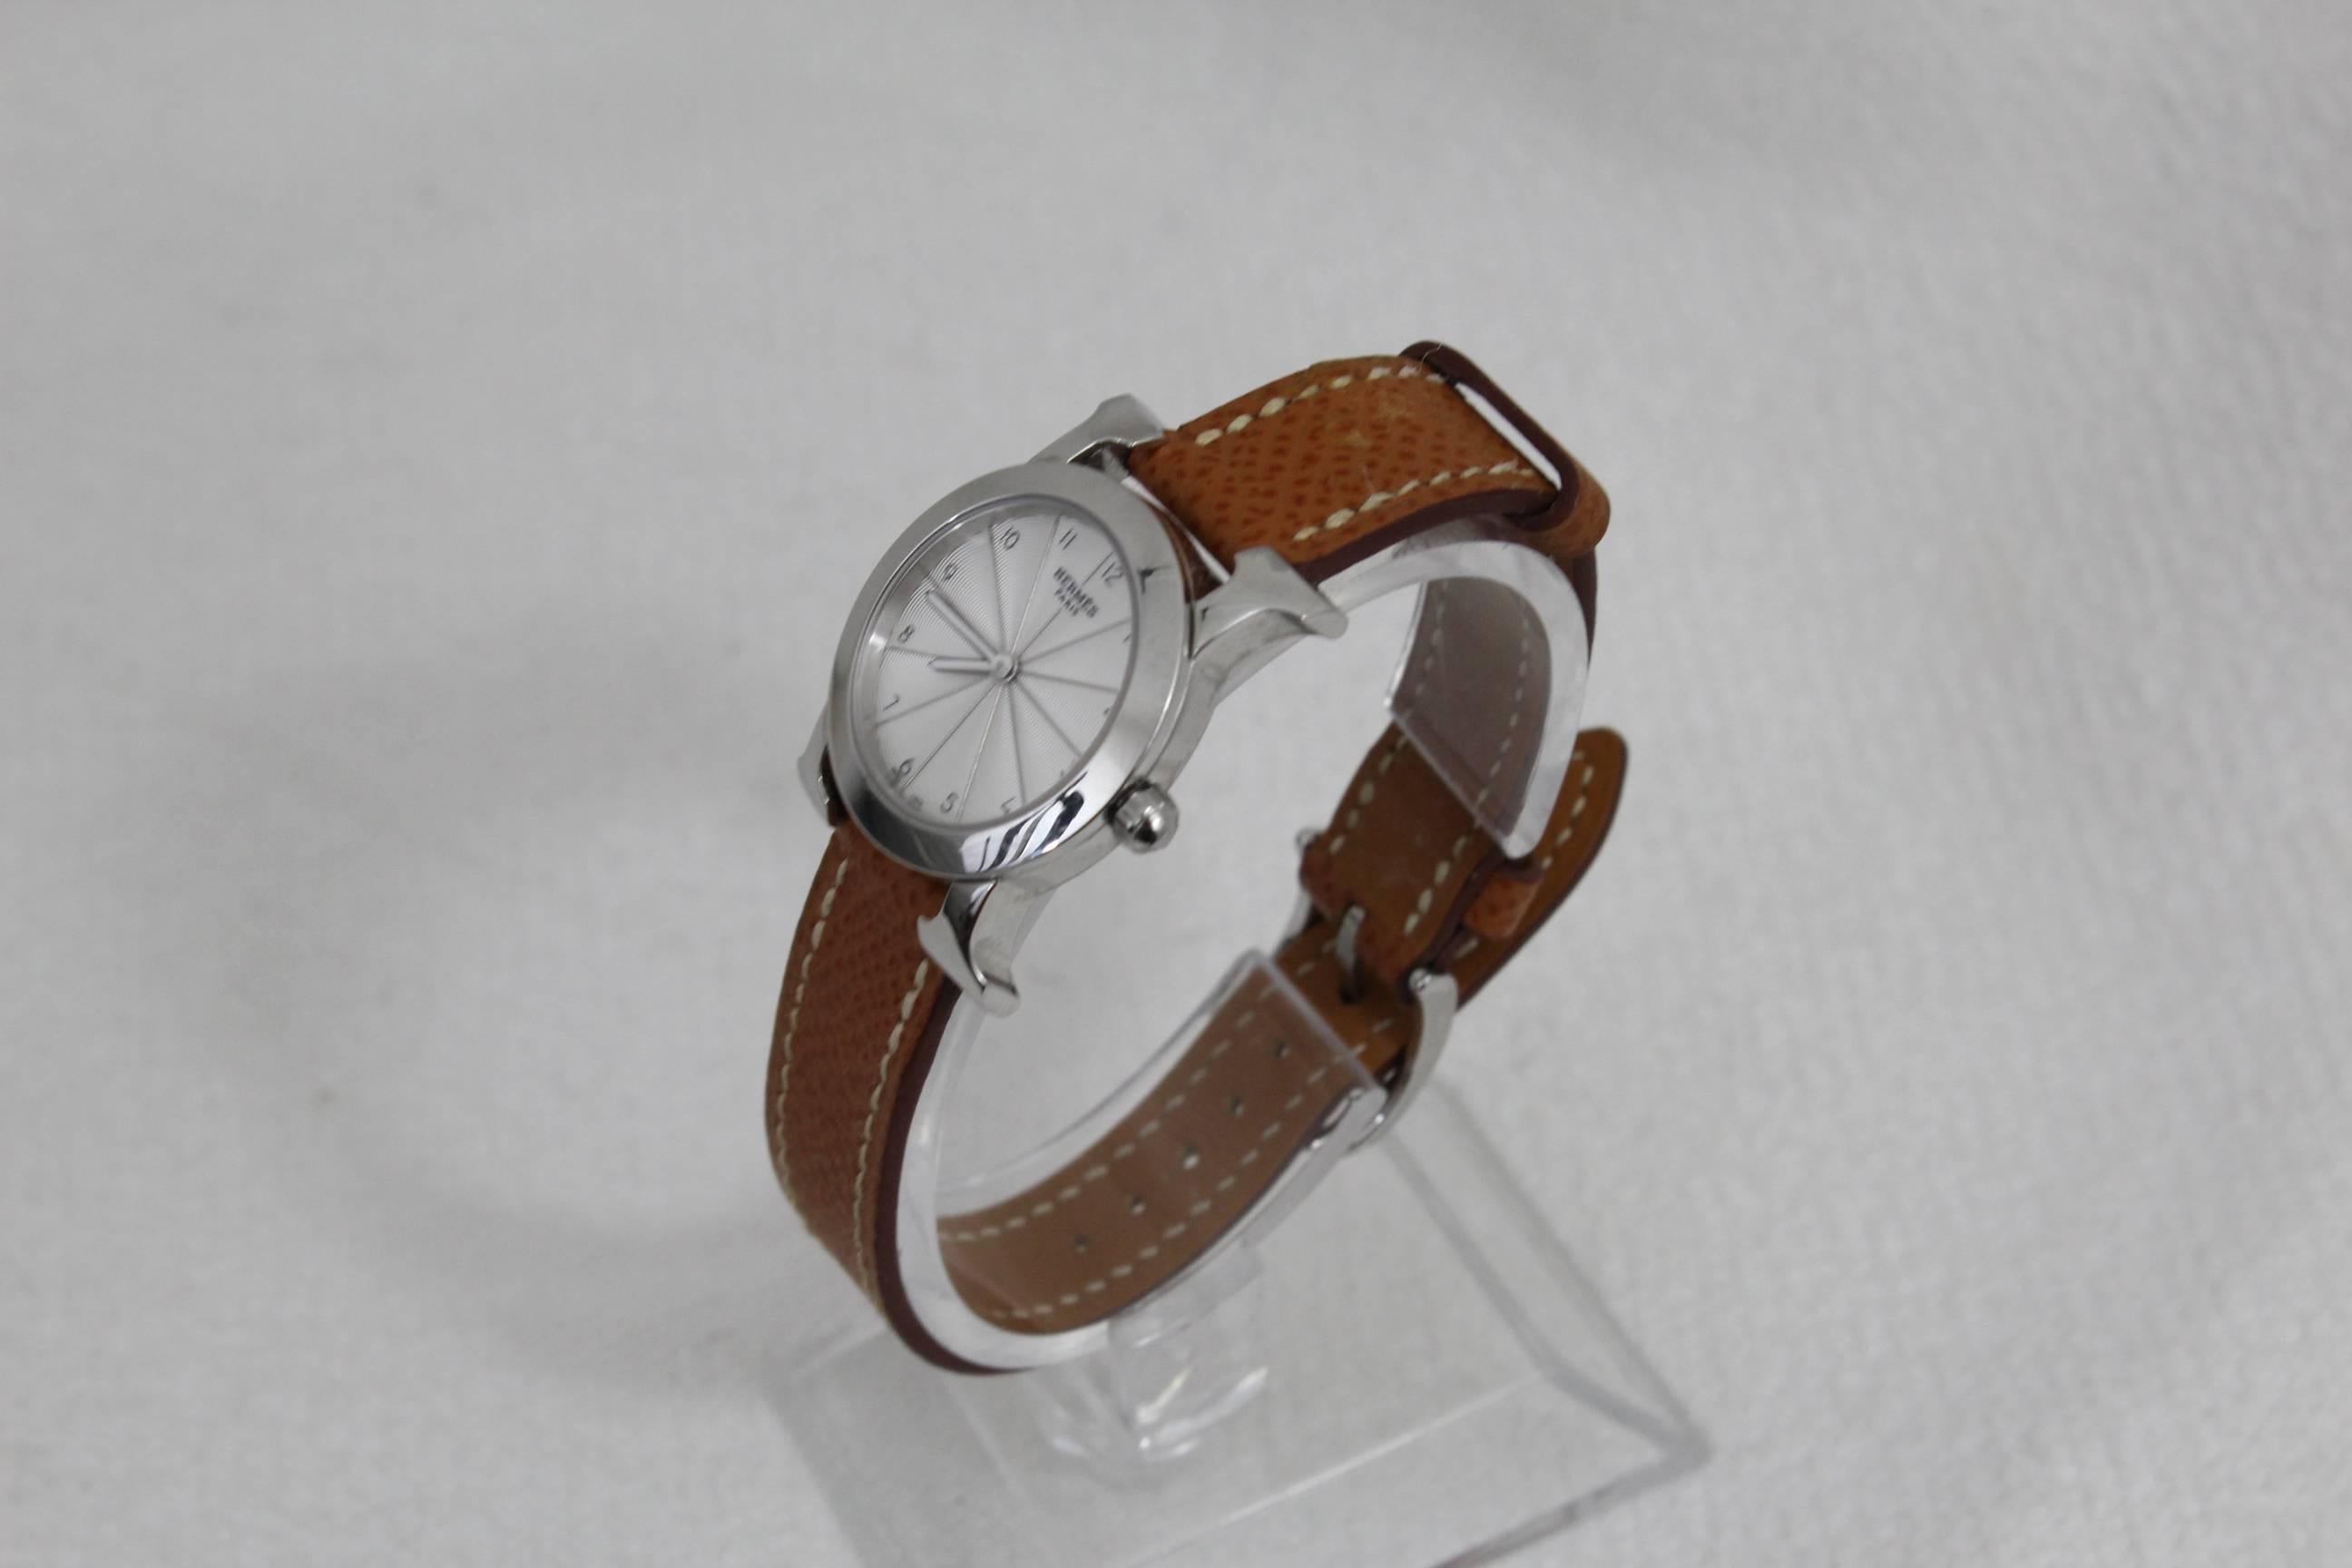 Hermes Stainless Steel Hermes heure H Female watch with Gold leather band.

Watch used but in really good condition, just some small sign of use in the band.

Excellent working condition.

Bracelet with a m in a square so from 2009